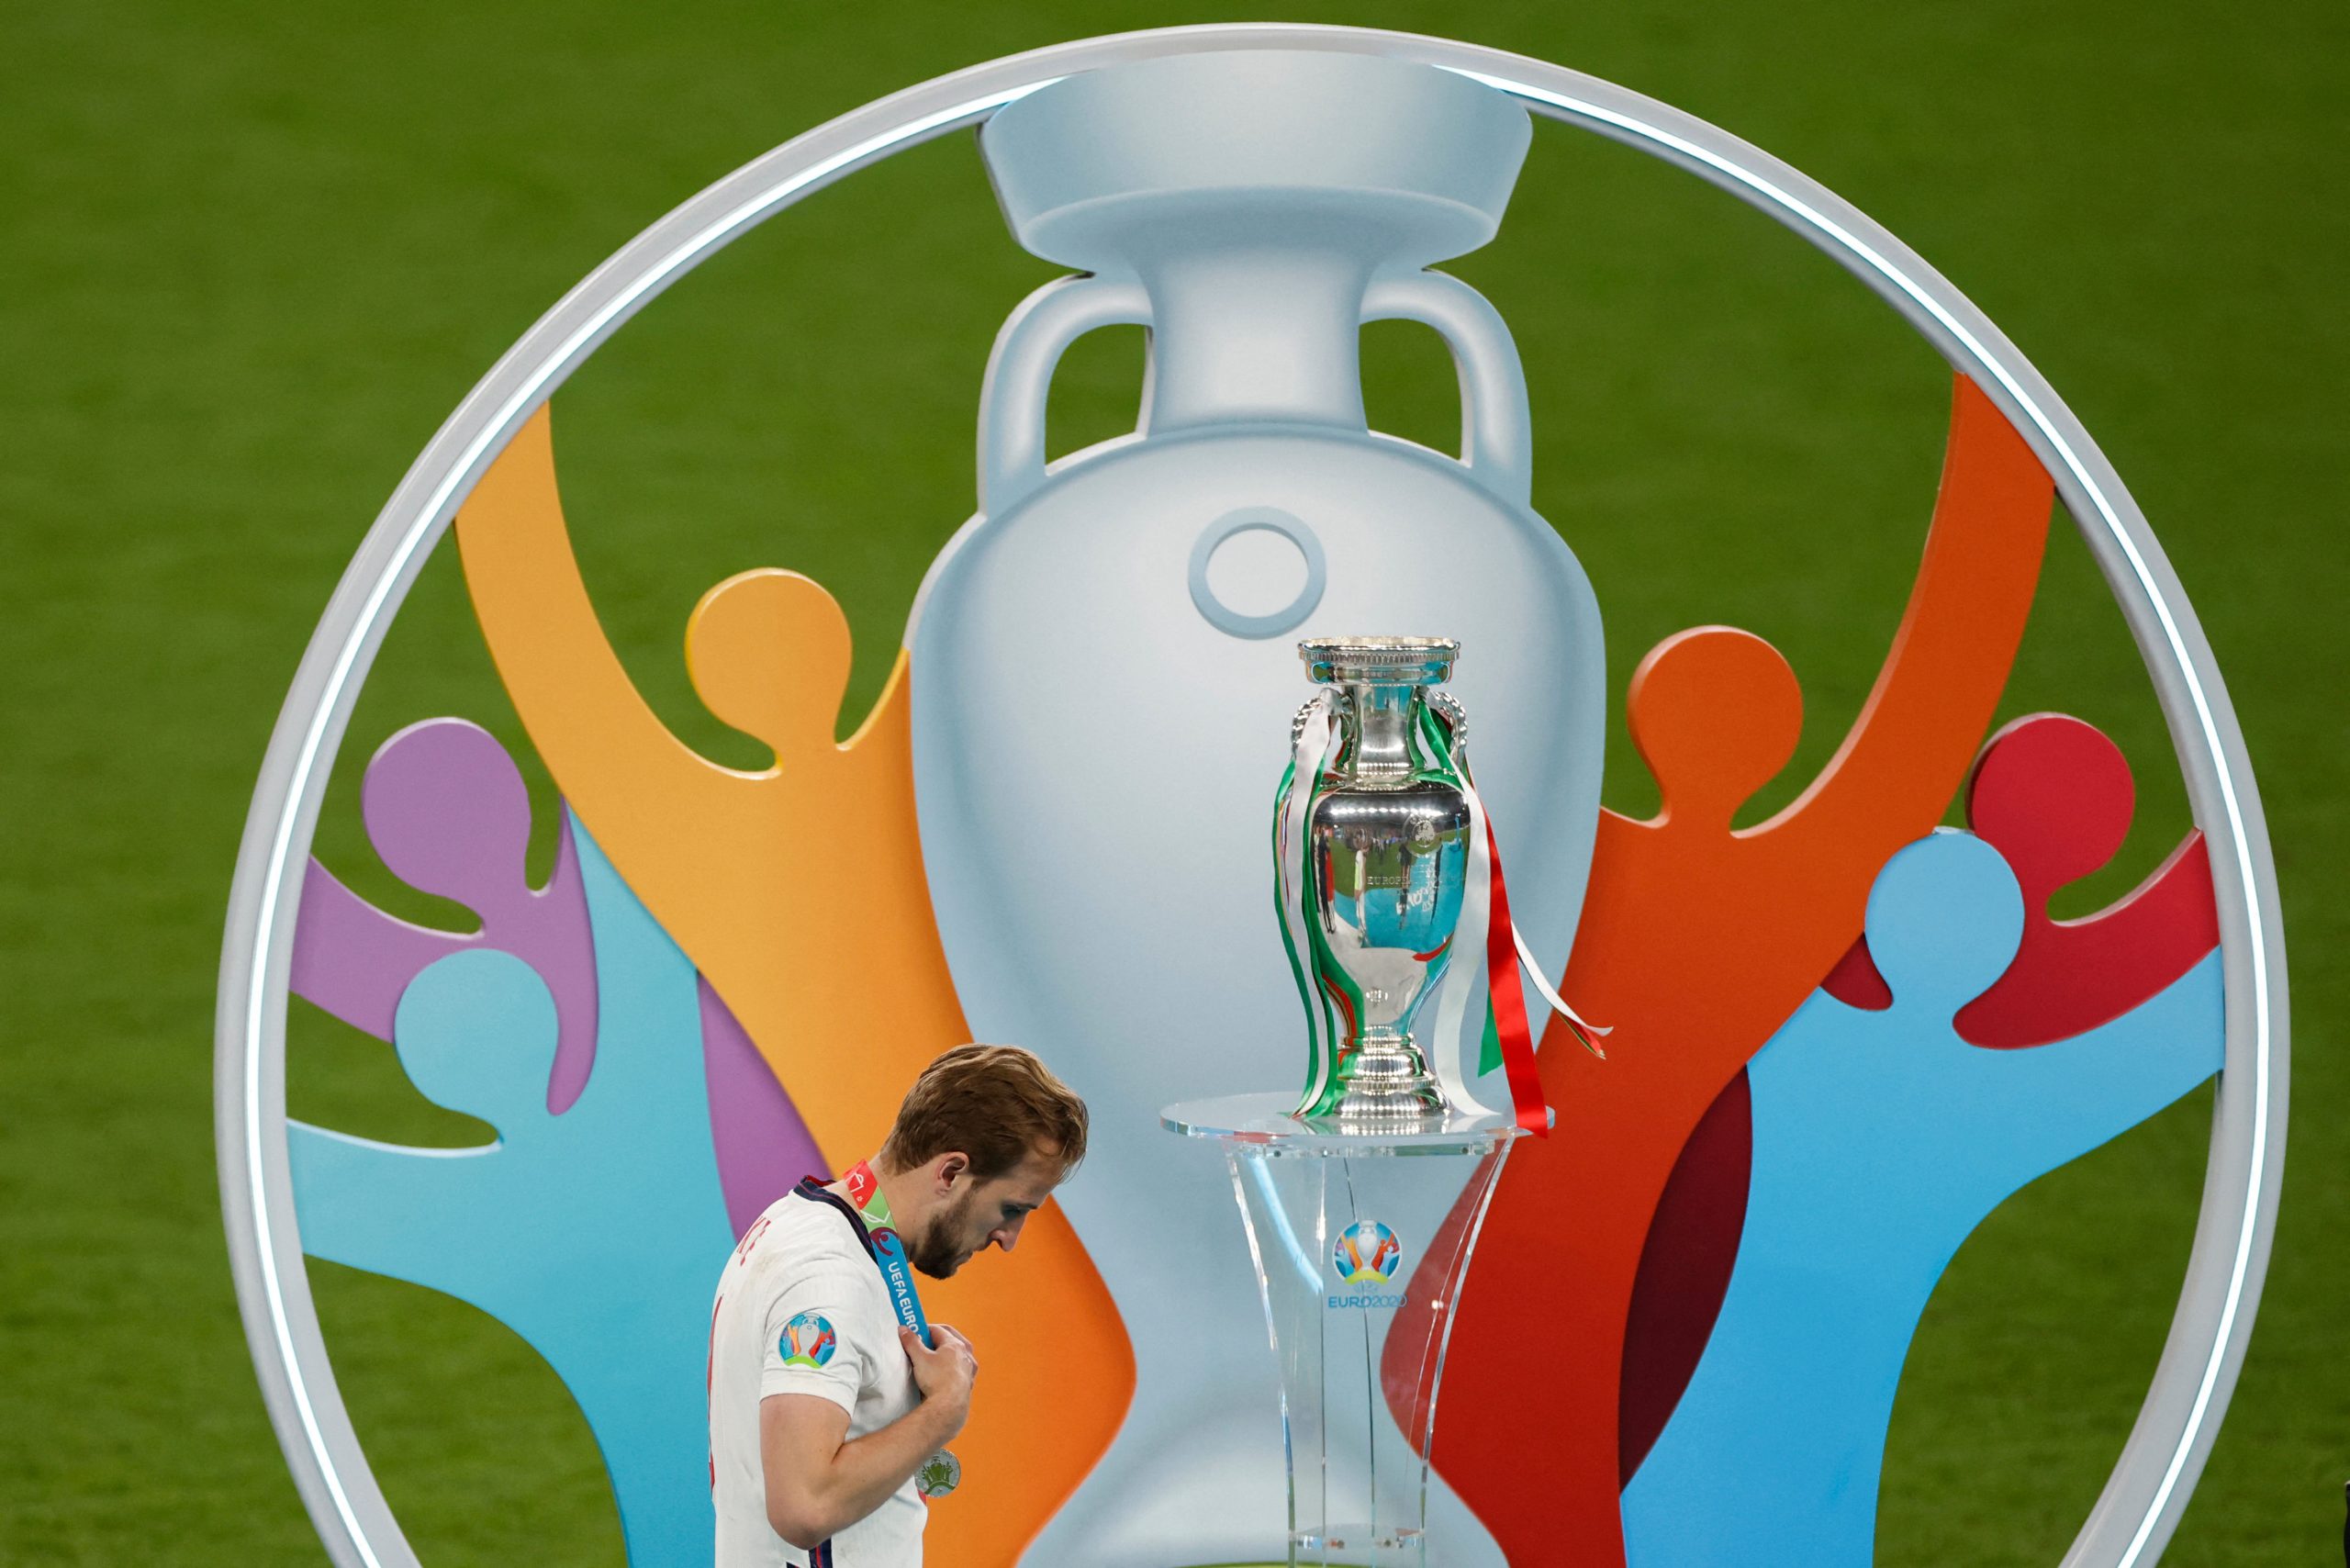 ‘Worst feeling in the world’: Harry Kane on England’s loss in Euro 2020 final